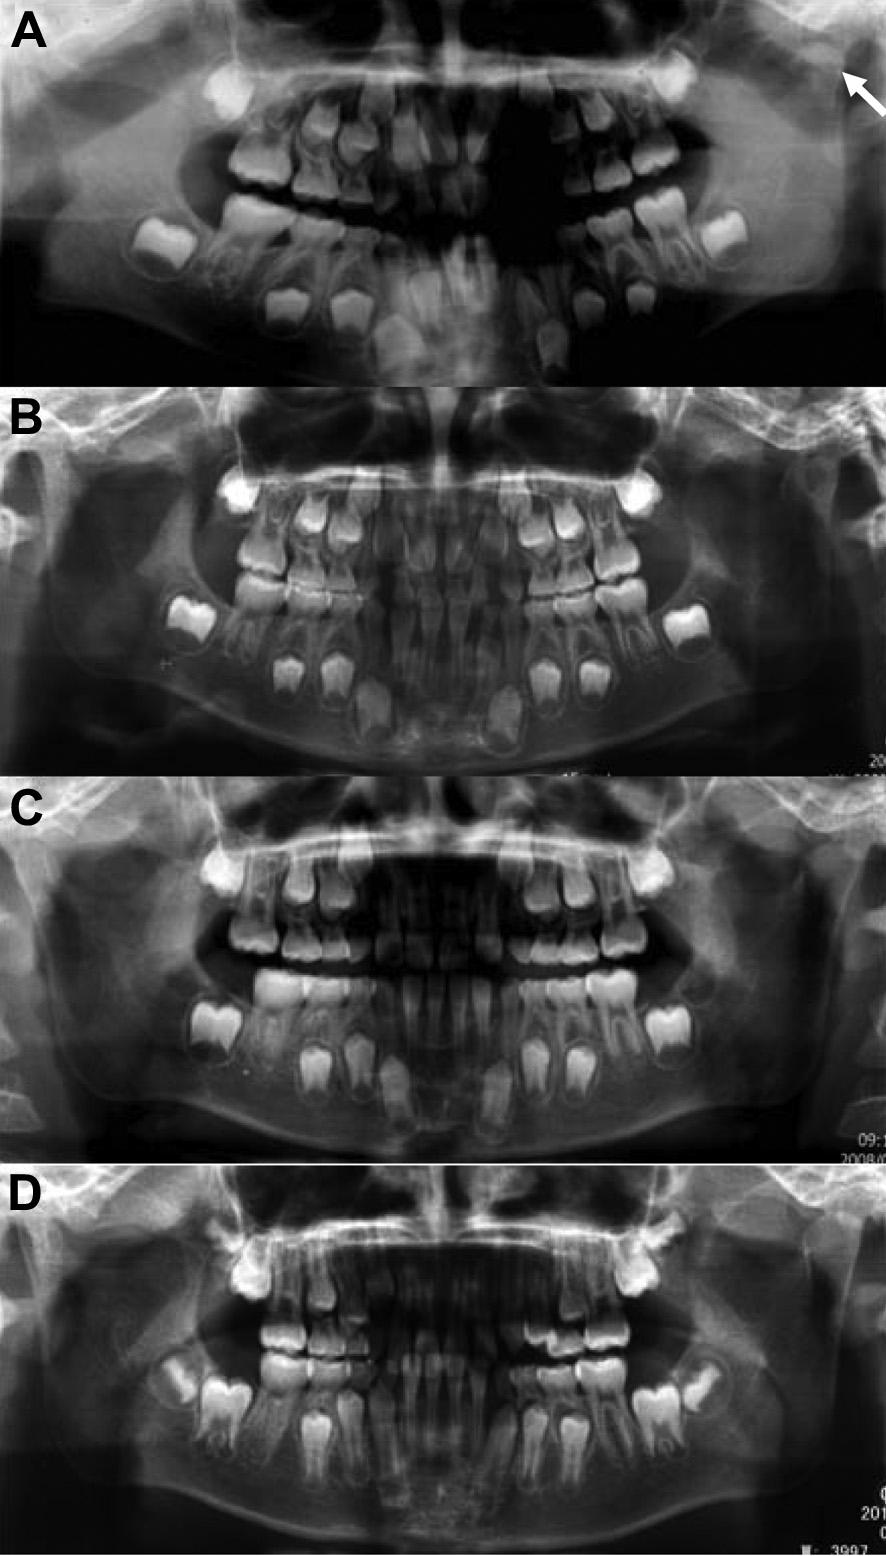 Y.-m. Zhao et al. / Journal of Cranio-Maxillo-Facial Surgery 42 (2014) 1078e1082 1081 slight (<3 mm) deviation to the affected side during mouth opening.